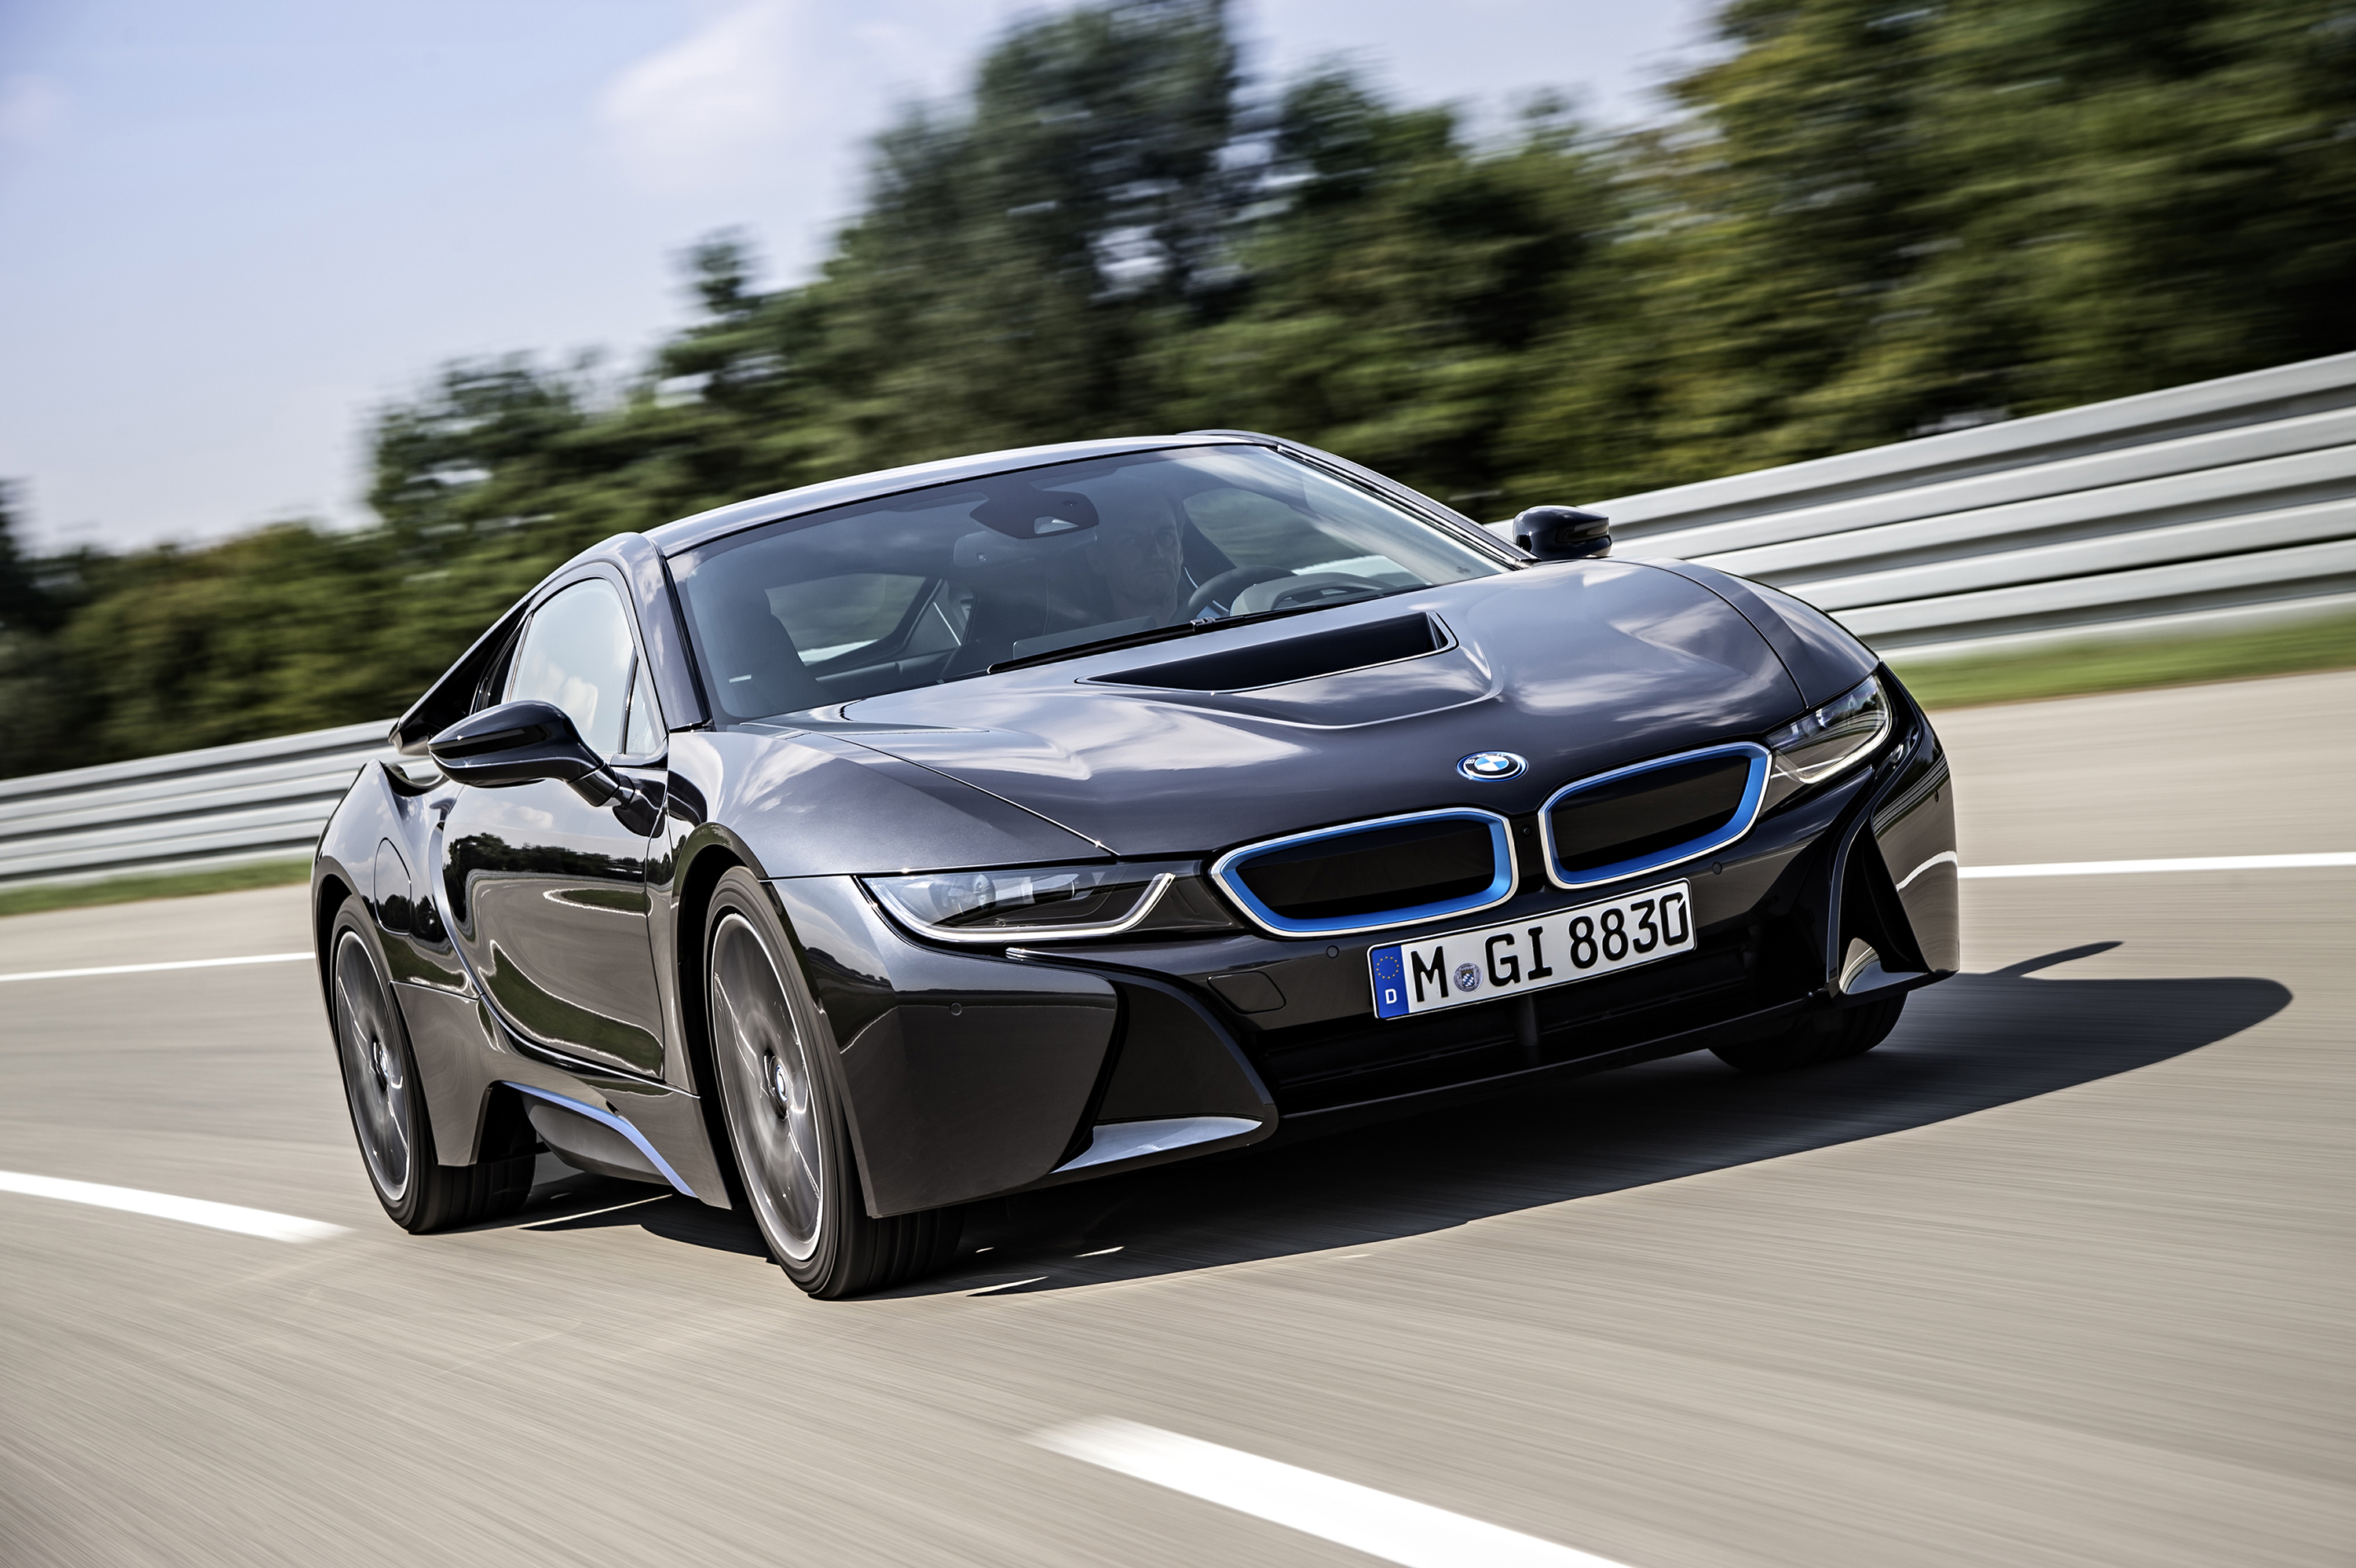 BMW i8: Driving into the future, fast